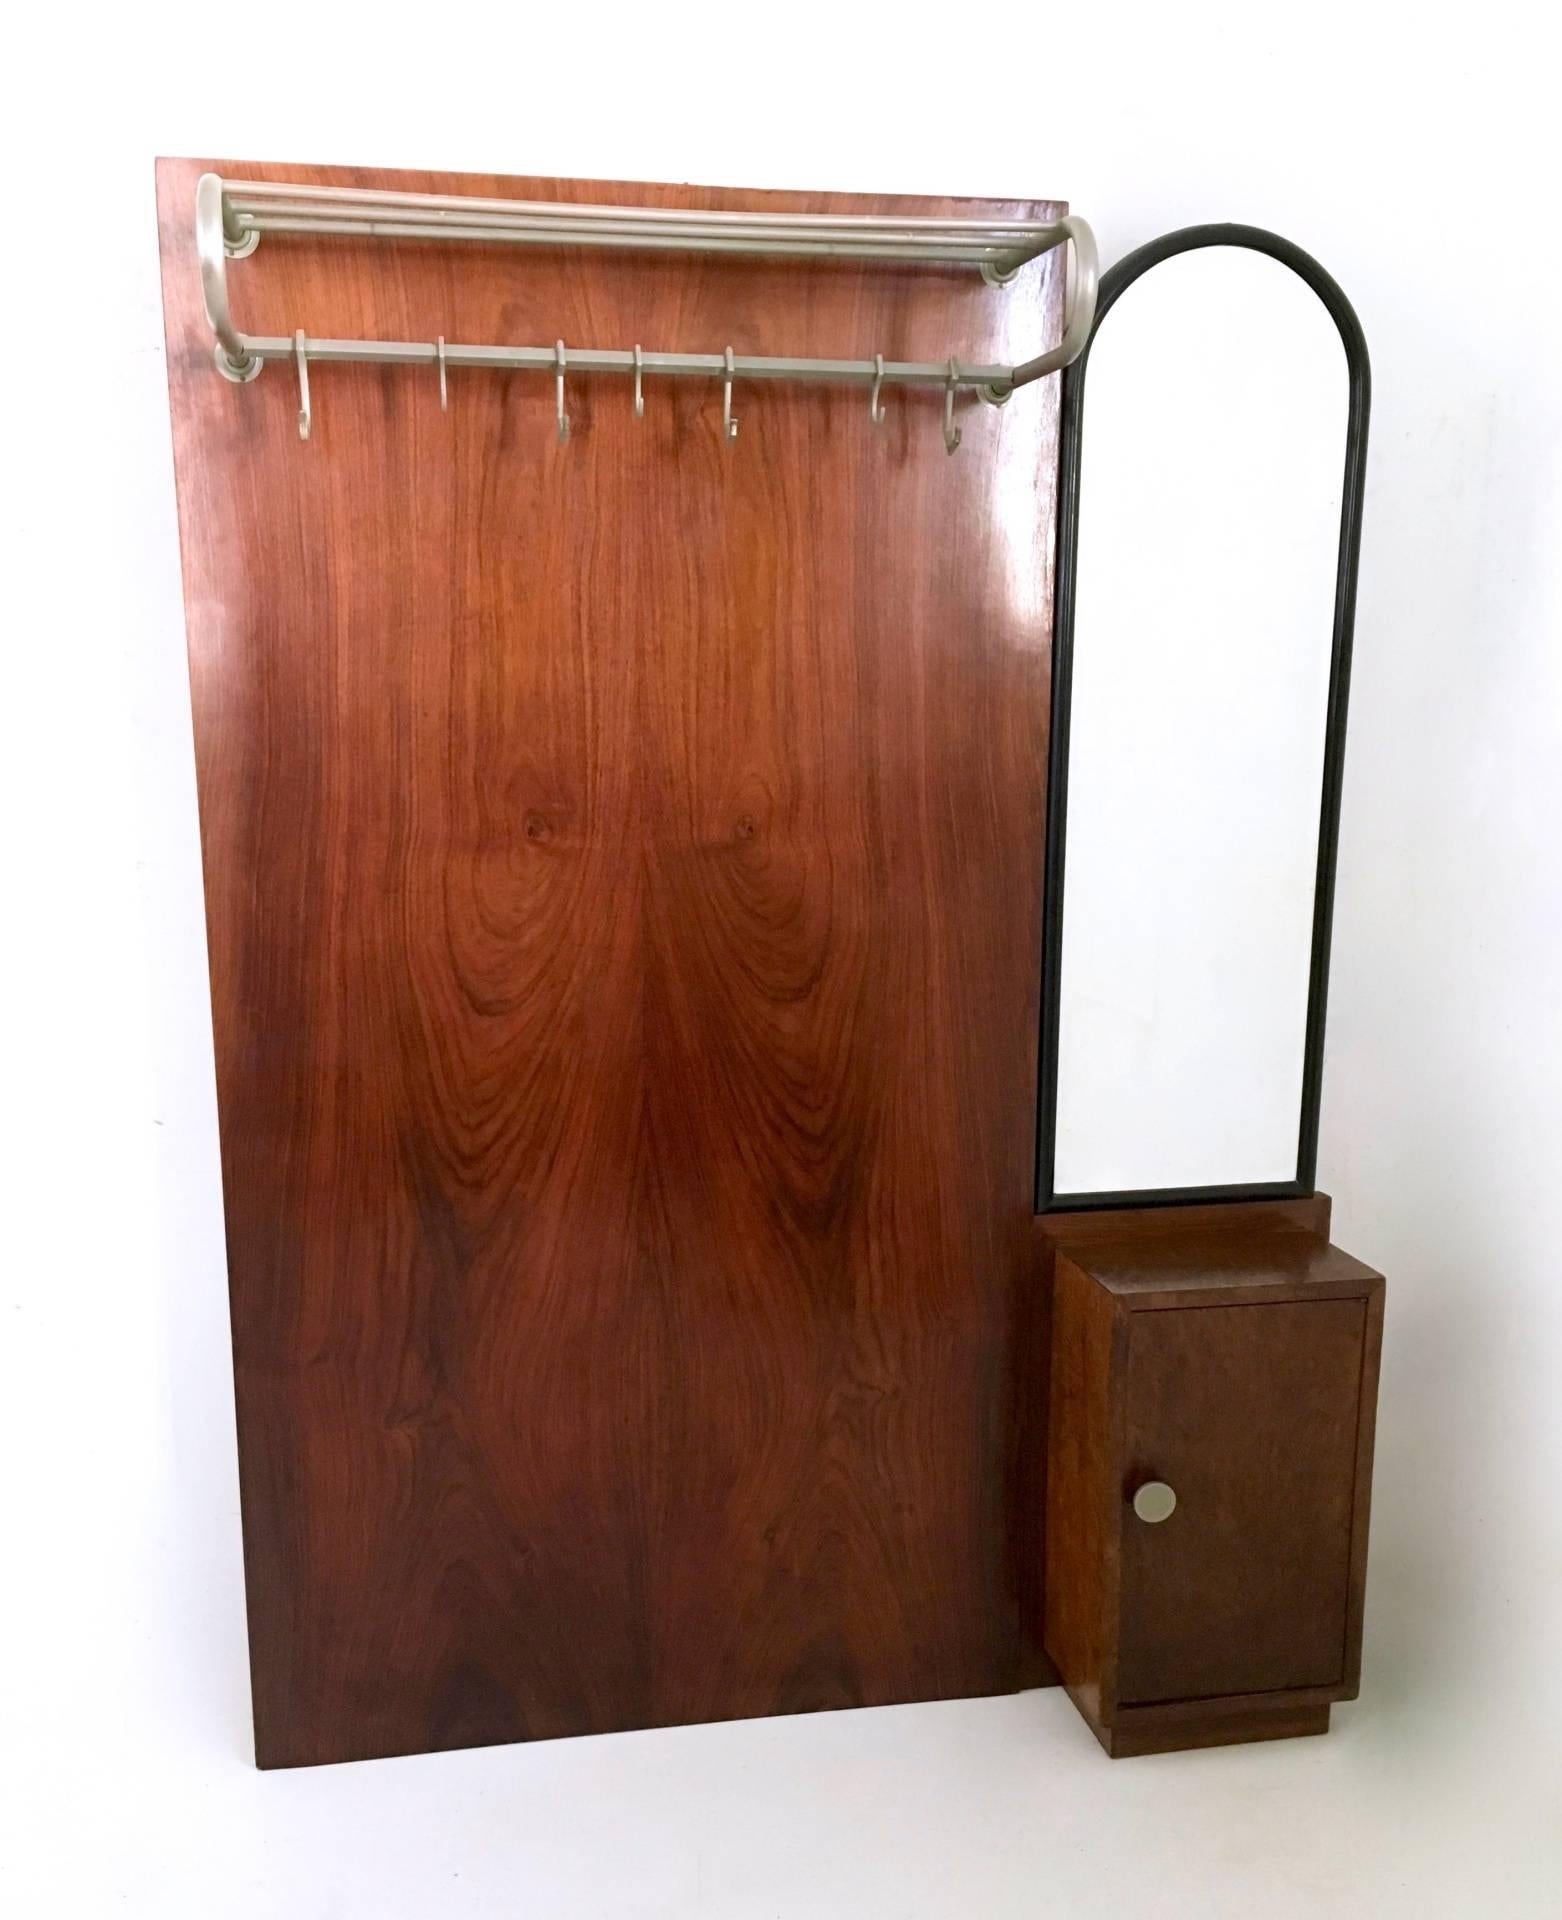 Made in mahogany briar-root and mahogany. 
It features nickel-plated brass and a bevelled mirror. 
It has been polished with shellac. 
The wooden part is in excellent condition. 
The metal part is in good condition, but may show traces of use.